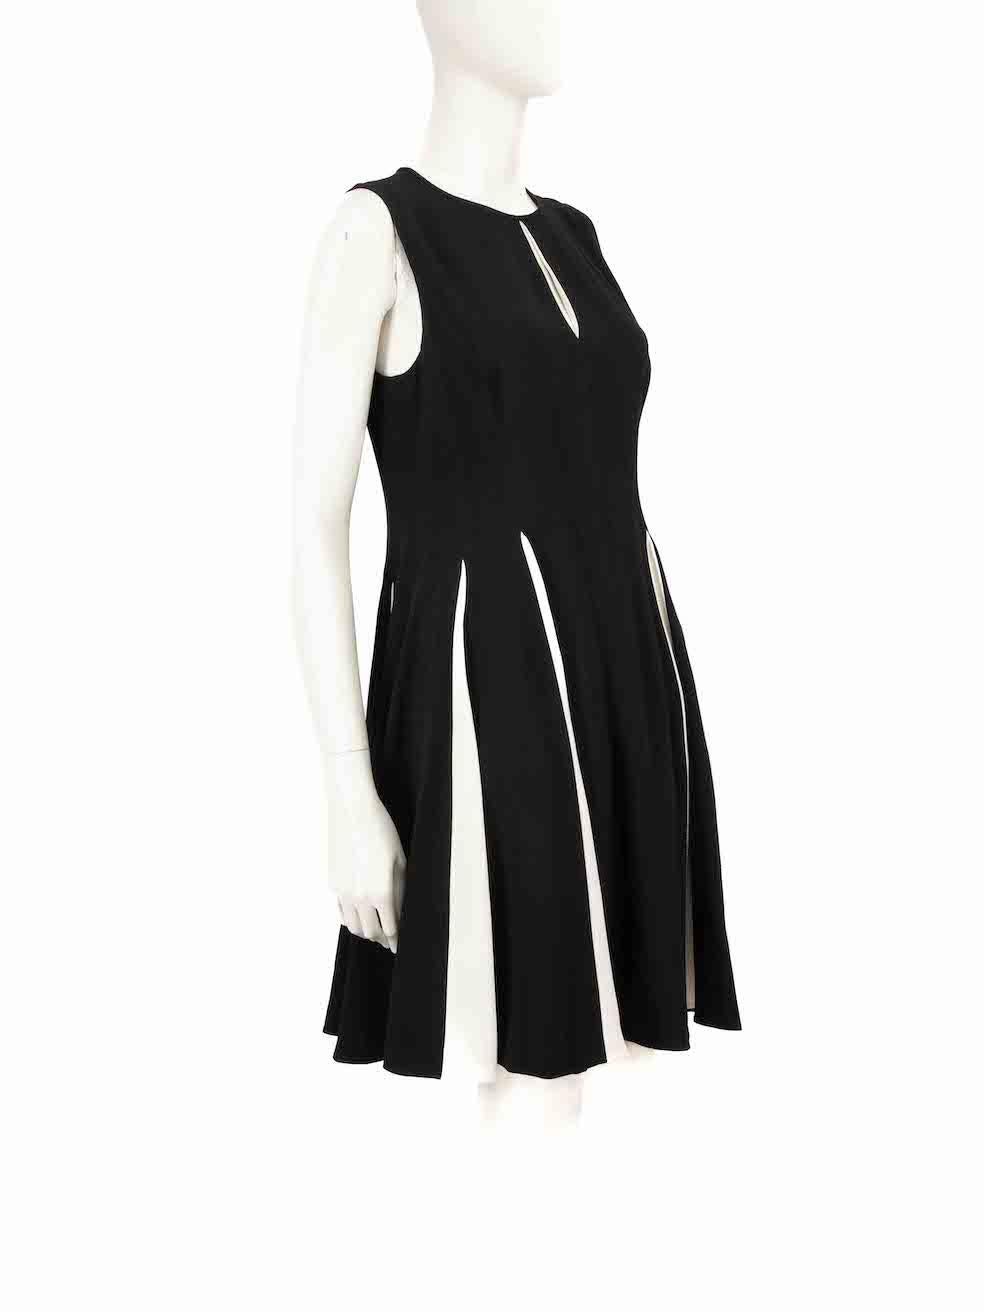 CONDITION is Very good. Minimal wear to dress is evident. Minimal wear to the arm holes and the front is seen with a few pulls to the weave on this used Proenza Schouler designer resale item.
 
 
 
 Details
 
 
 Black
 
 Viscose
 
 Dress
 
 Knee